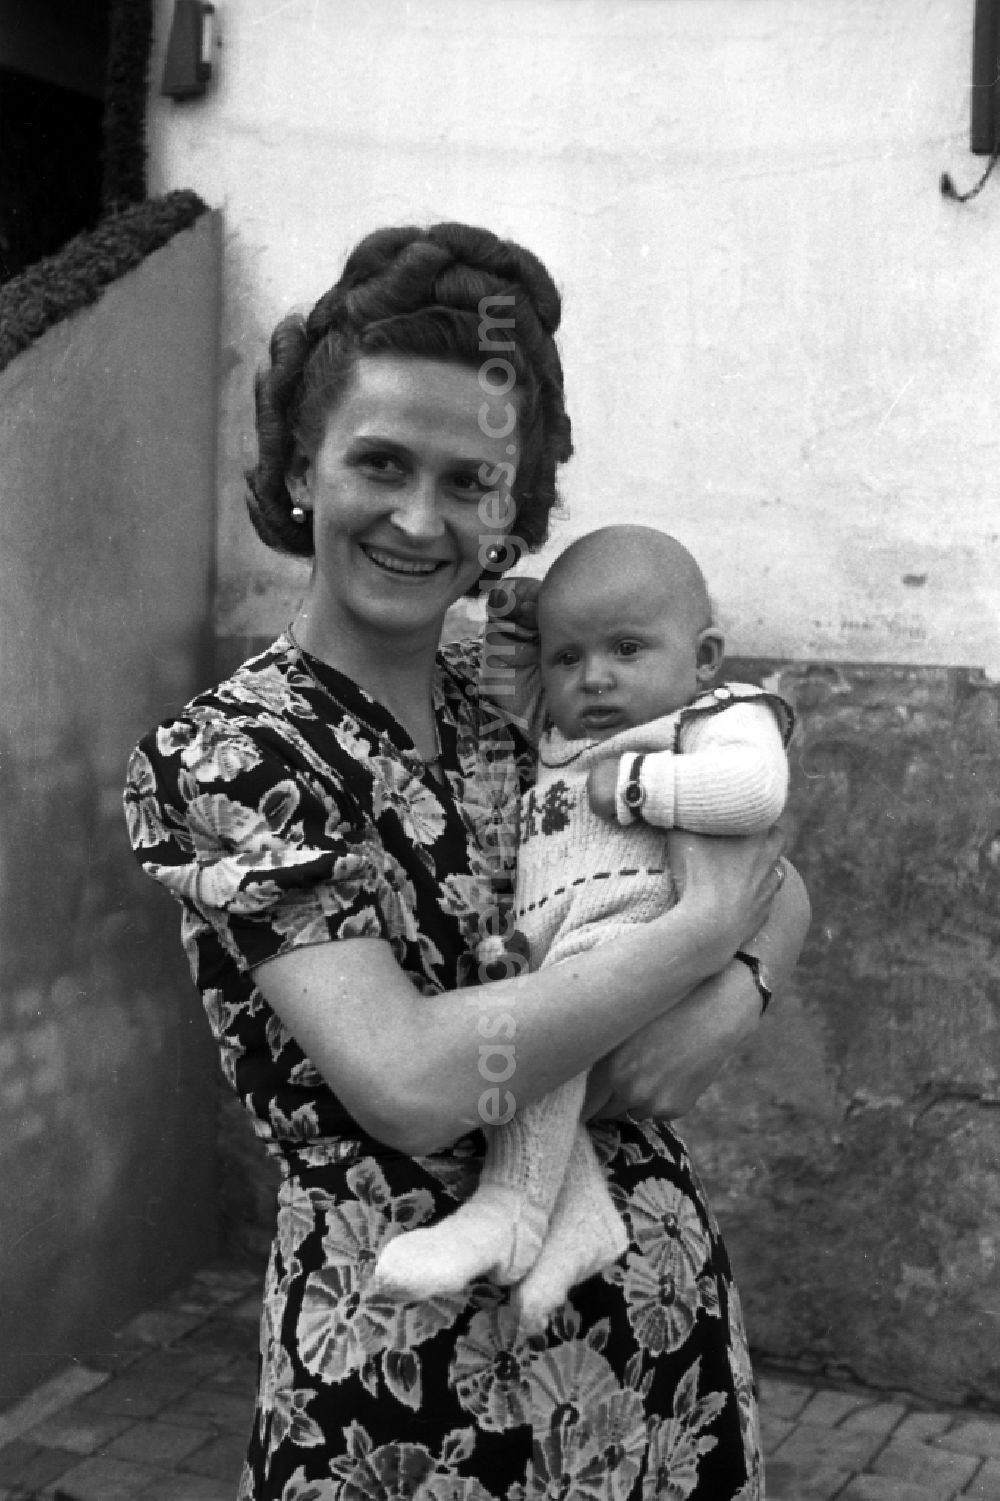 GDR photo archive: Merseburg - A woman holds a baby on the arm in Merseburg in the federal state Saxony-Anhalt in the area of the former GDR, German democratic republic